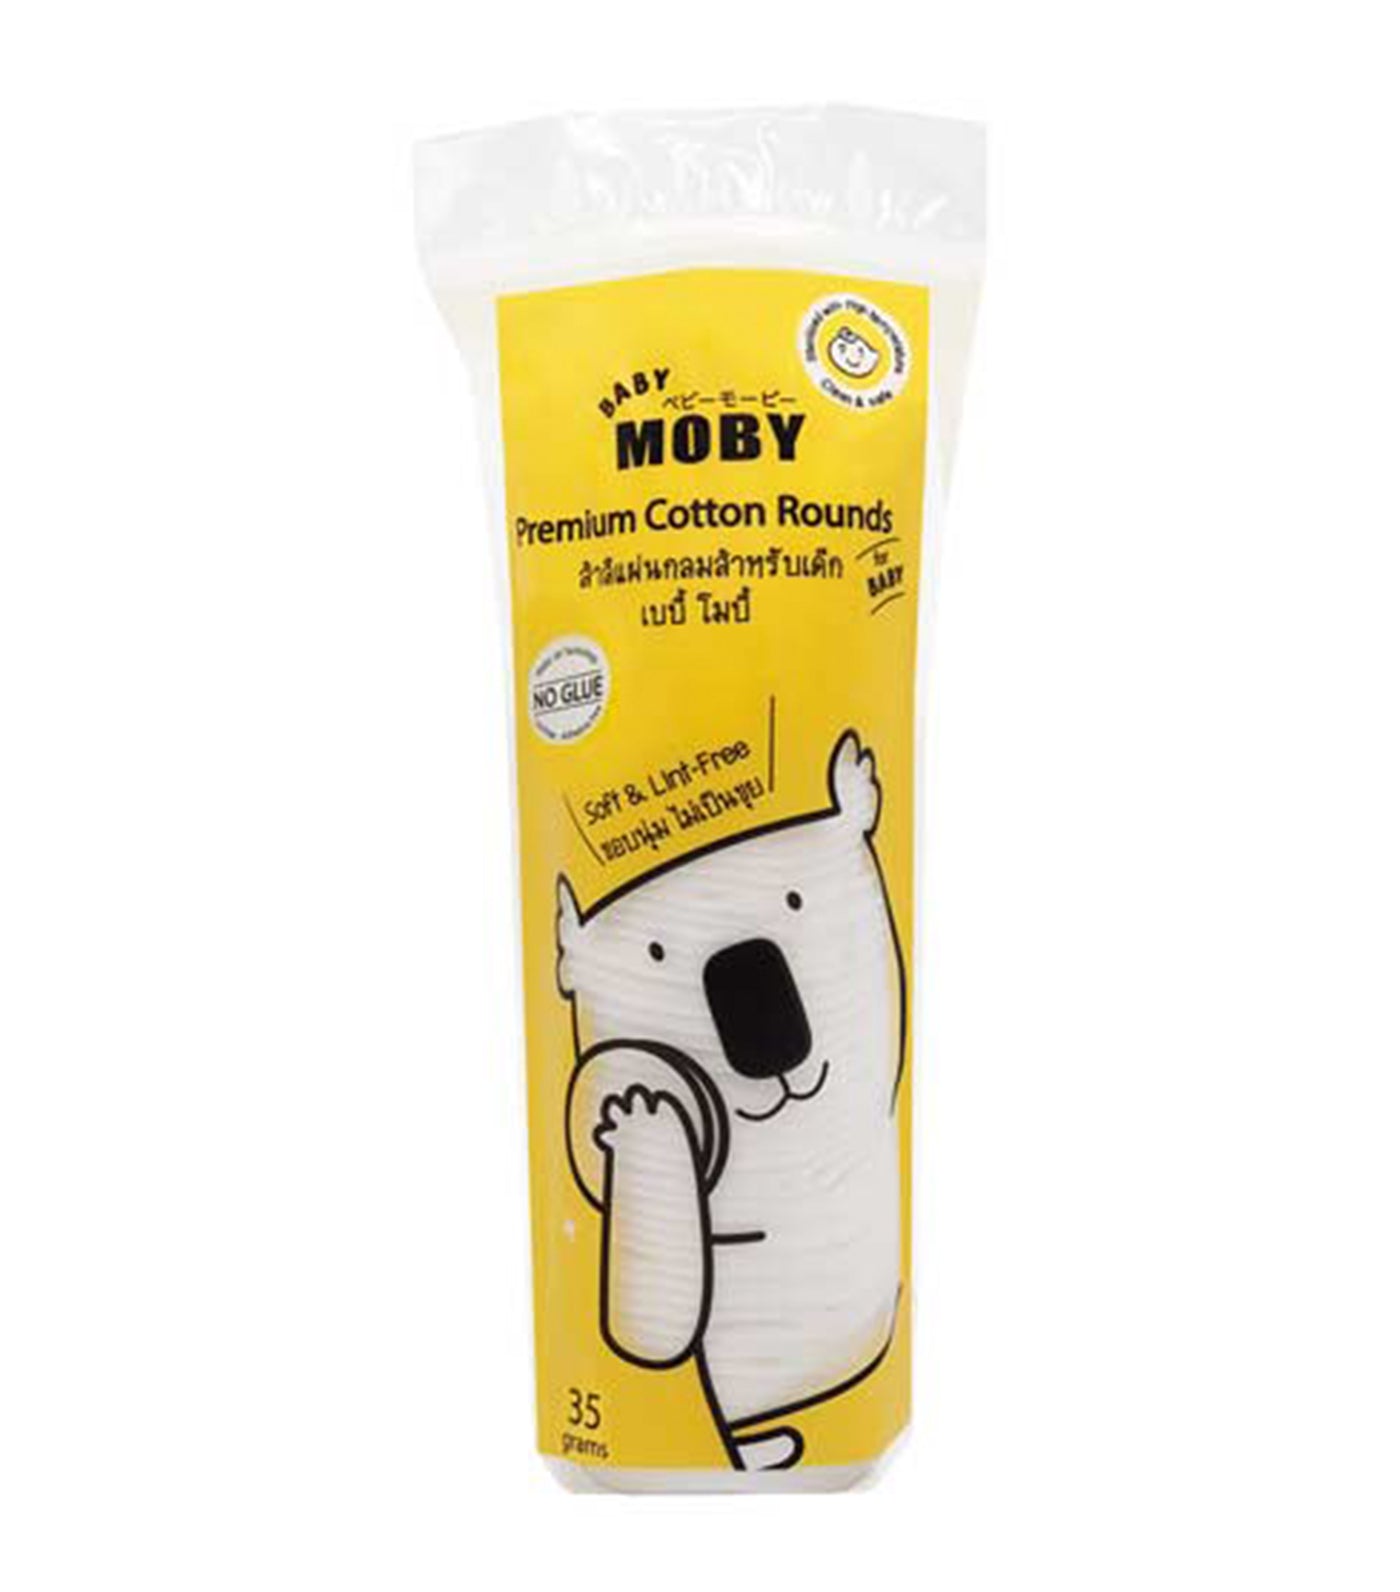 baby moby premium cotton rounds